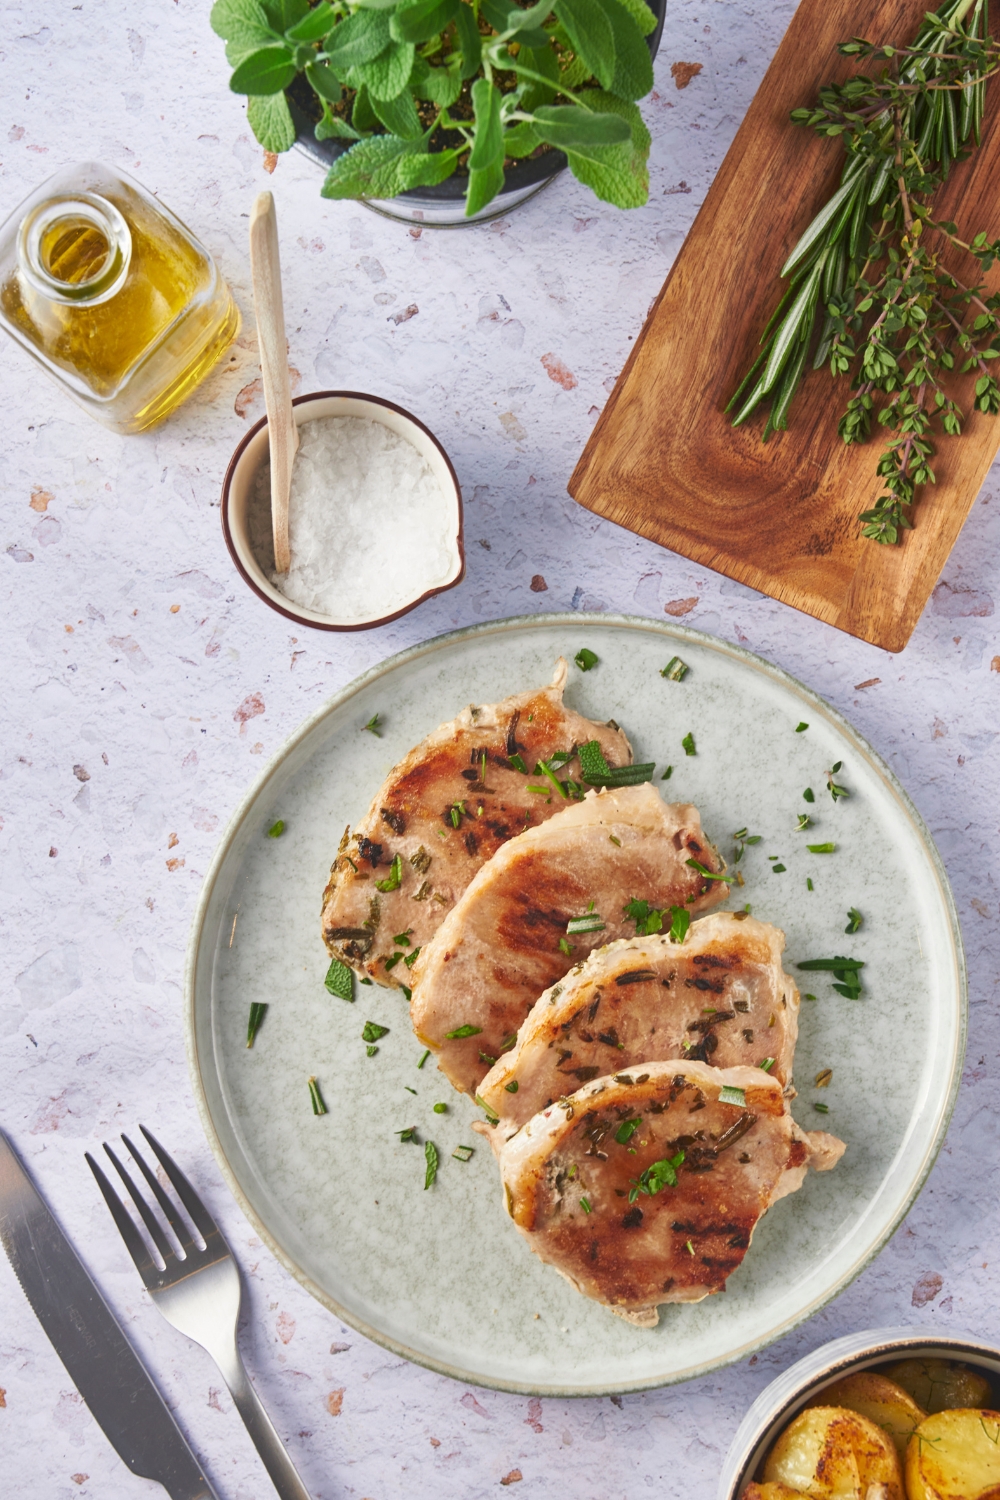 A blue plate with four seared pork chops layered on top of each other and garnished with fresh herbs. Surrounding the plate of pork chops is a bowl of salt, a container of oil, a fork and knife, and a wood tray with fresh herbs.